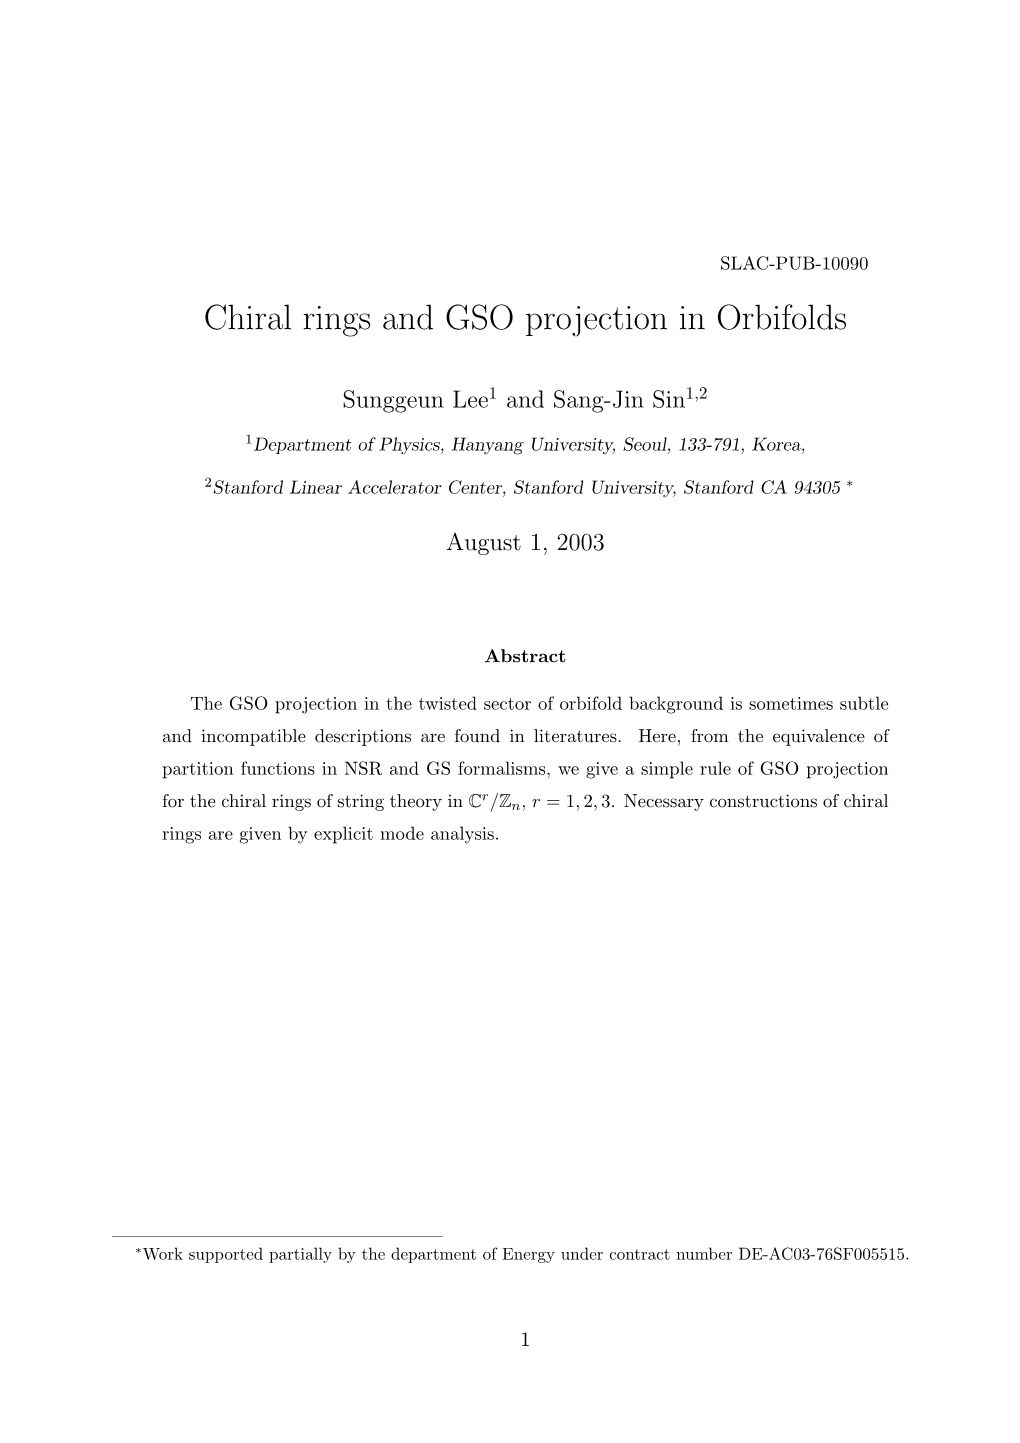 Chiral Rings and GSO Projection in Orbifolds